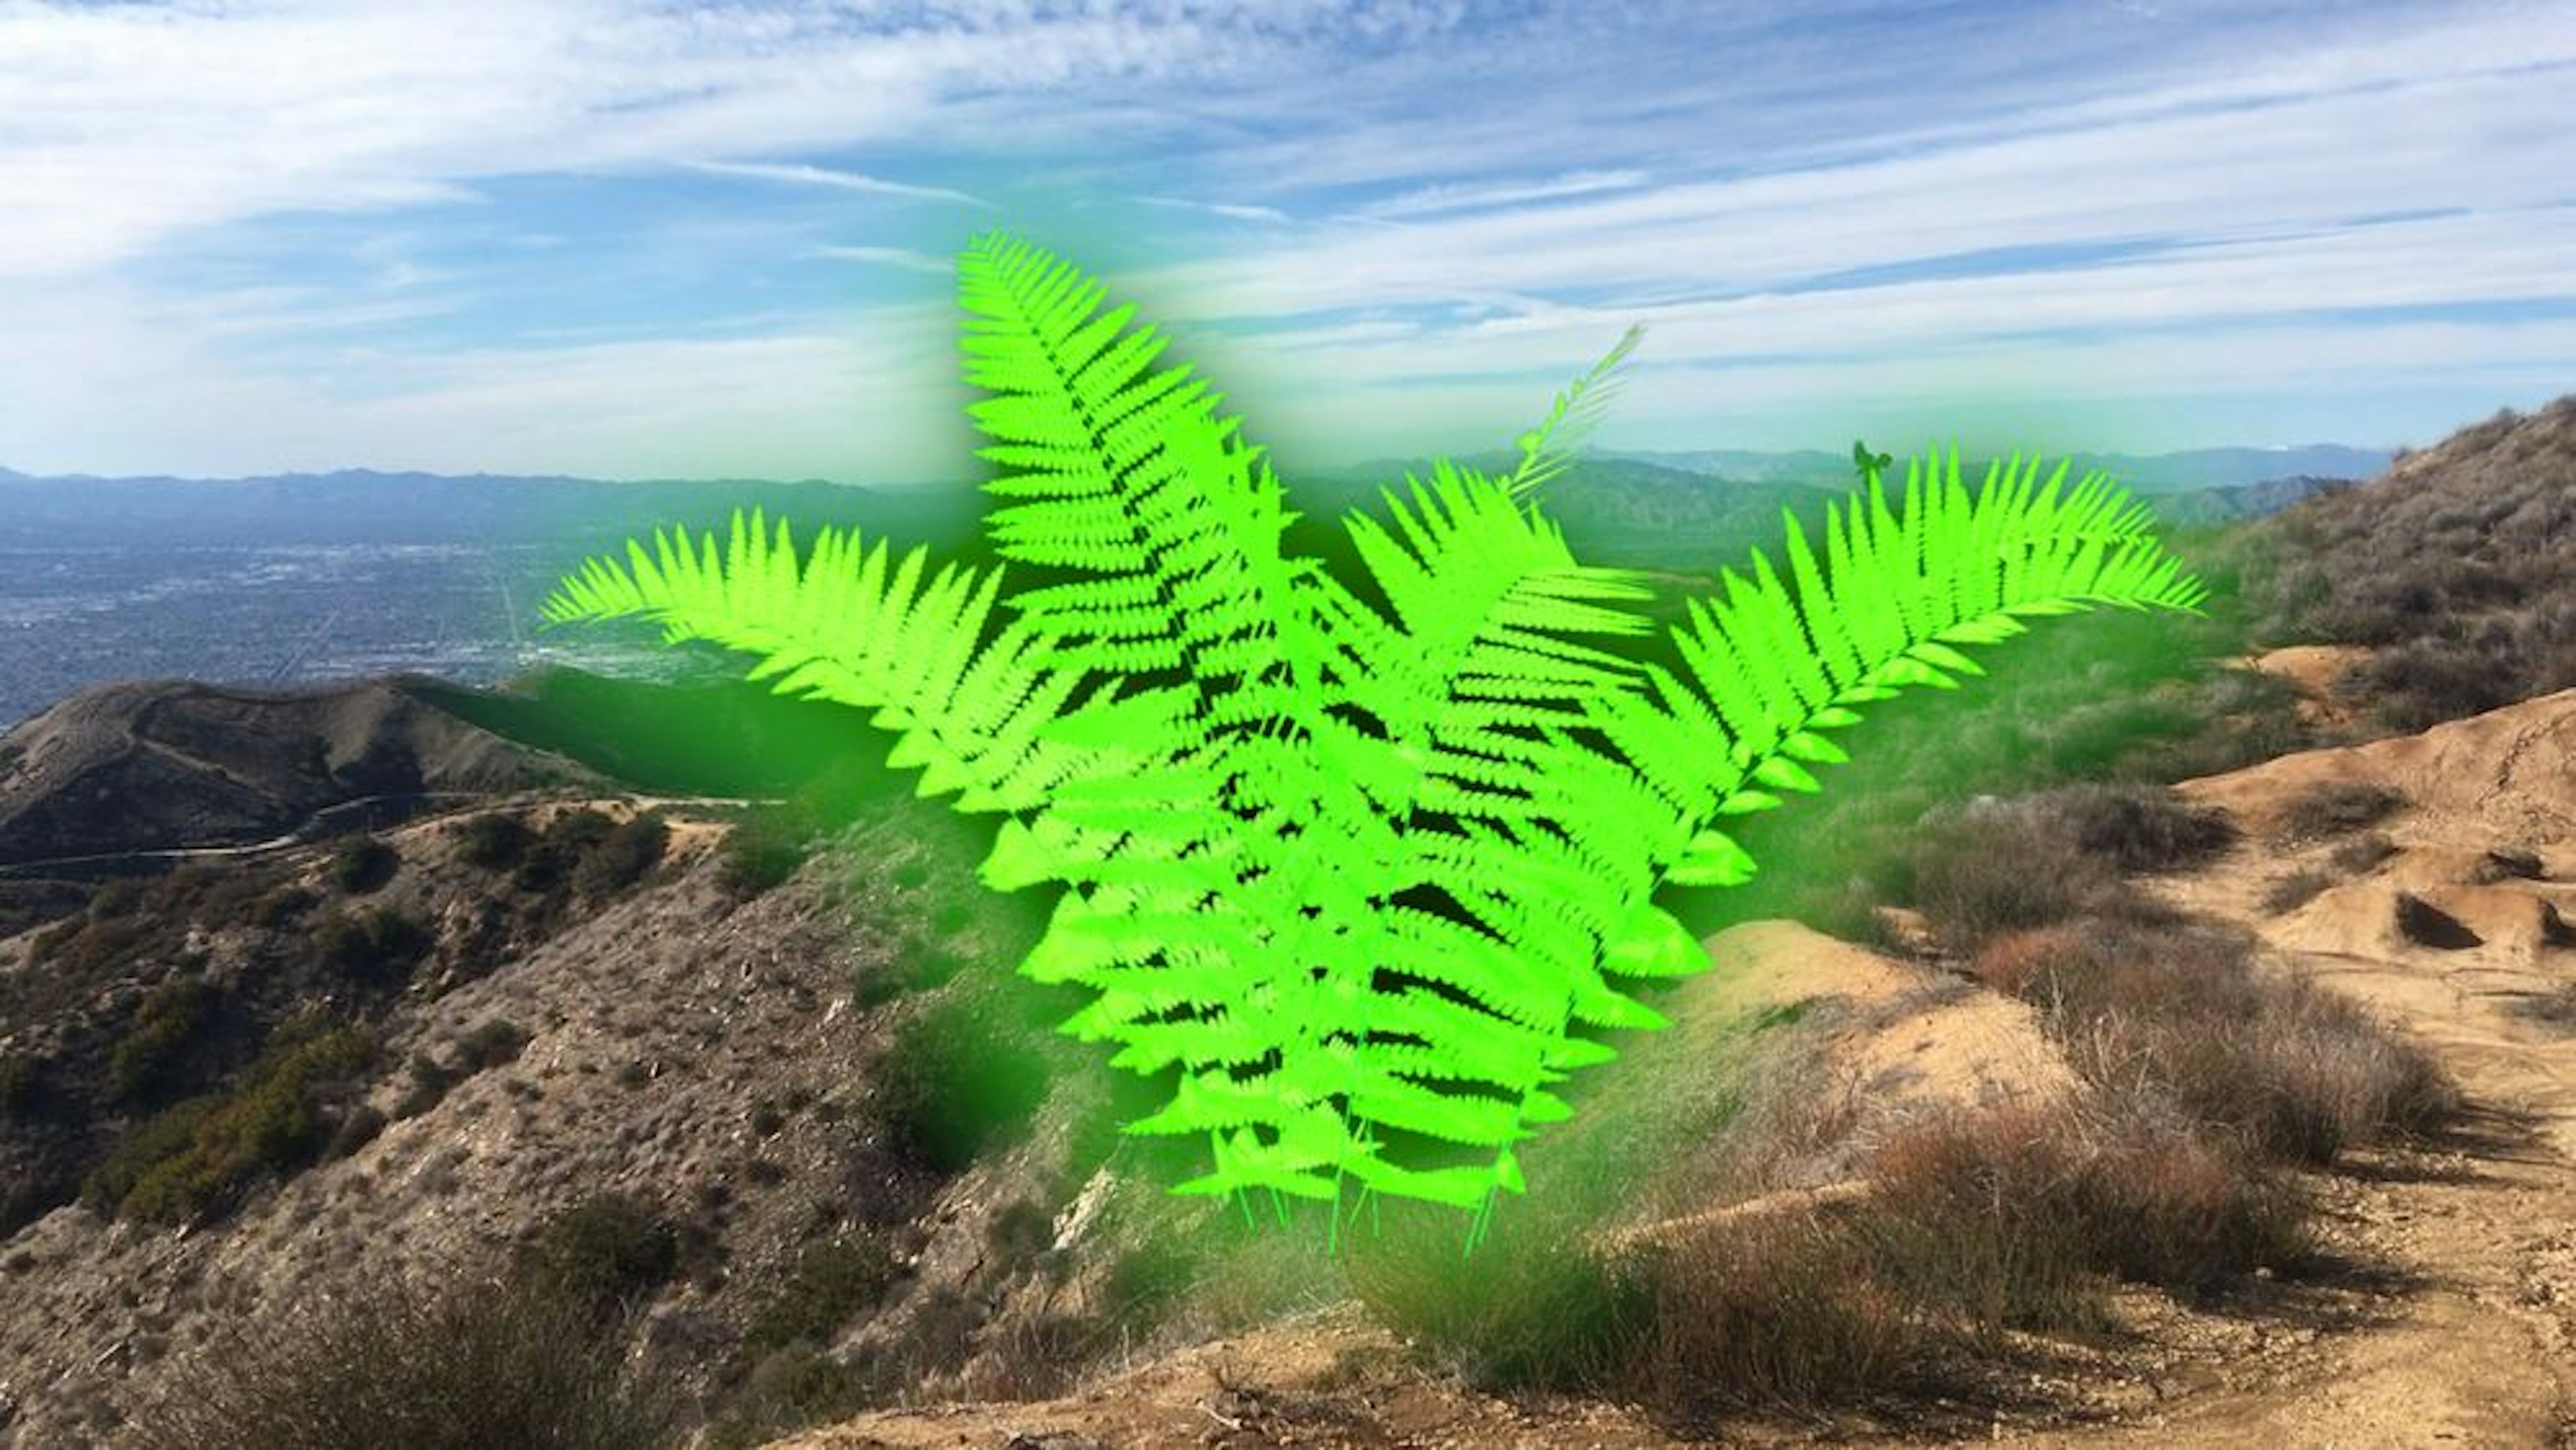 Film still showing a landscape with a digital illustration of a plant in the middle